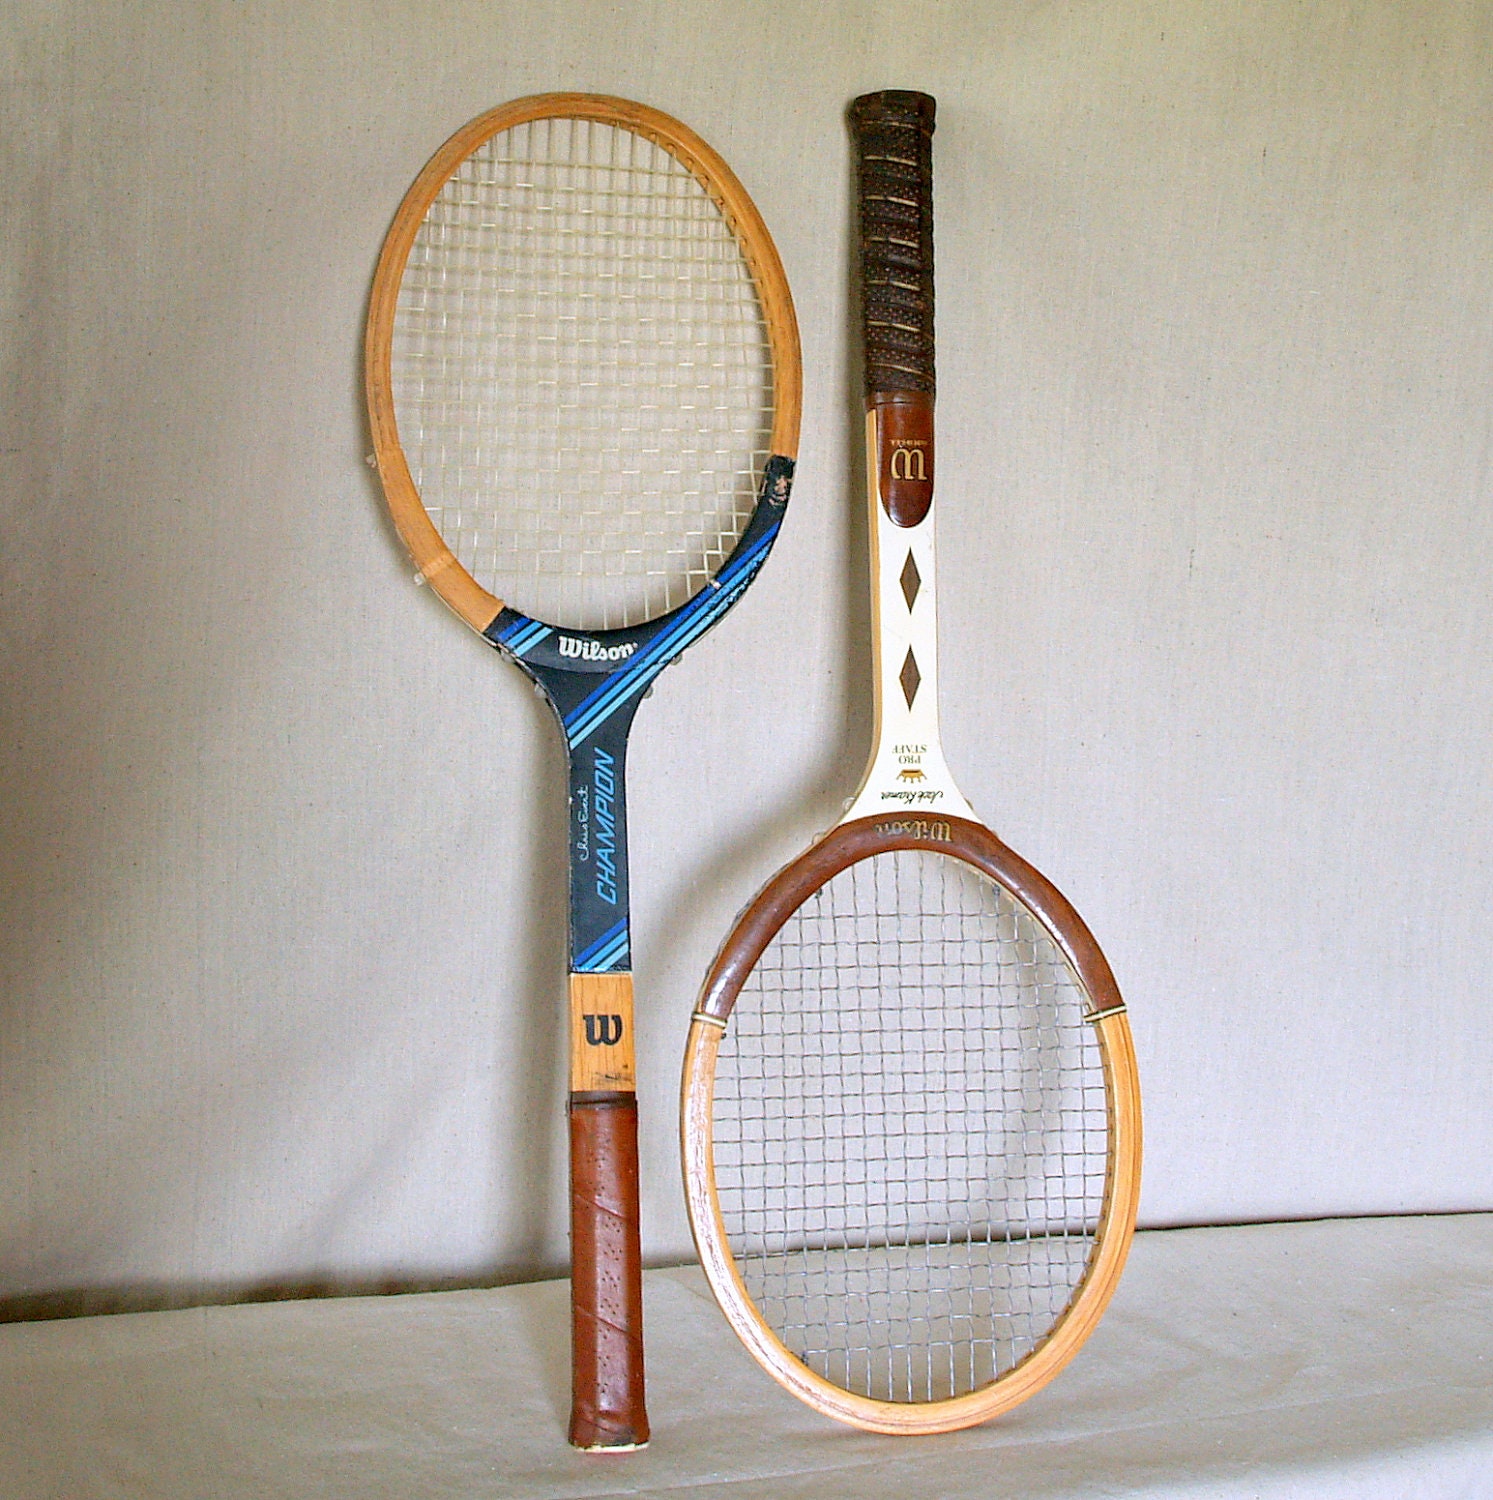 HIS & HERS 2 VINTAGE Tennis Rackets Solid Wood Retro Tennis Racquets Set of 2 Jack Kramer Pro Staff Collection and Chris Evert Champion - ACESFINDSVINTAGE